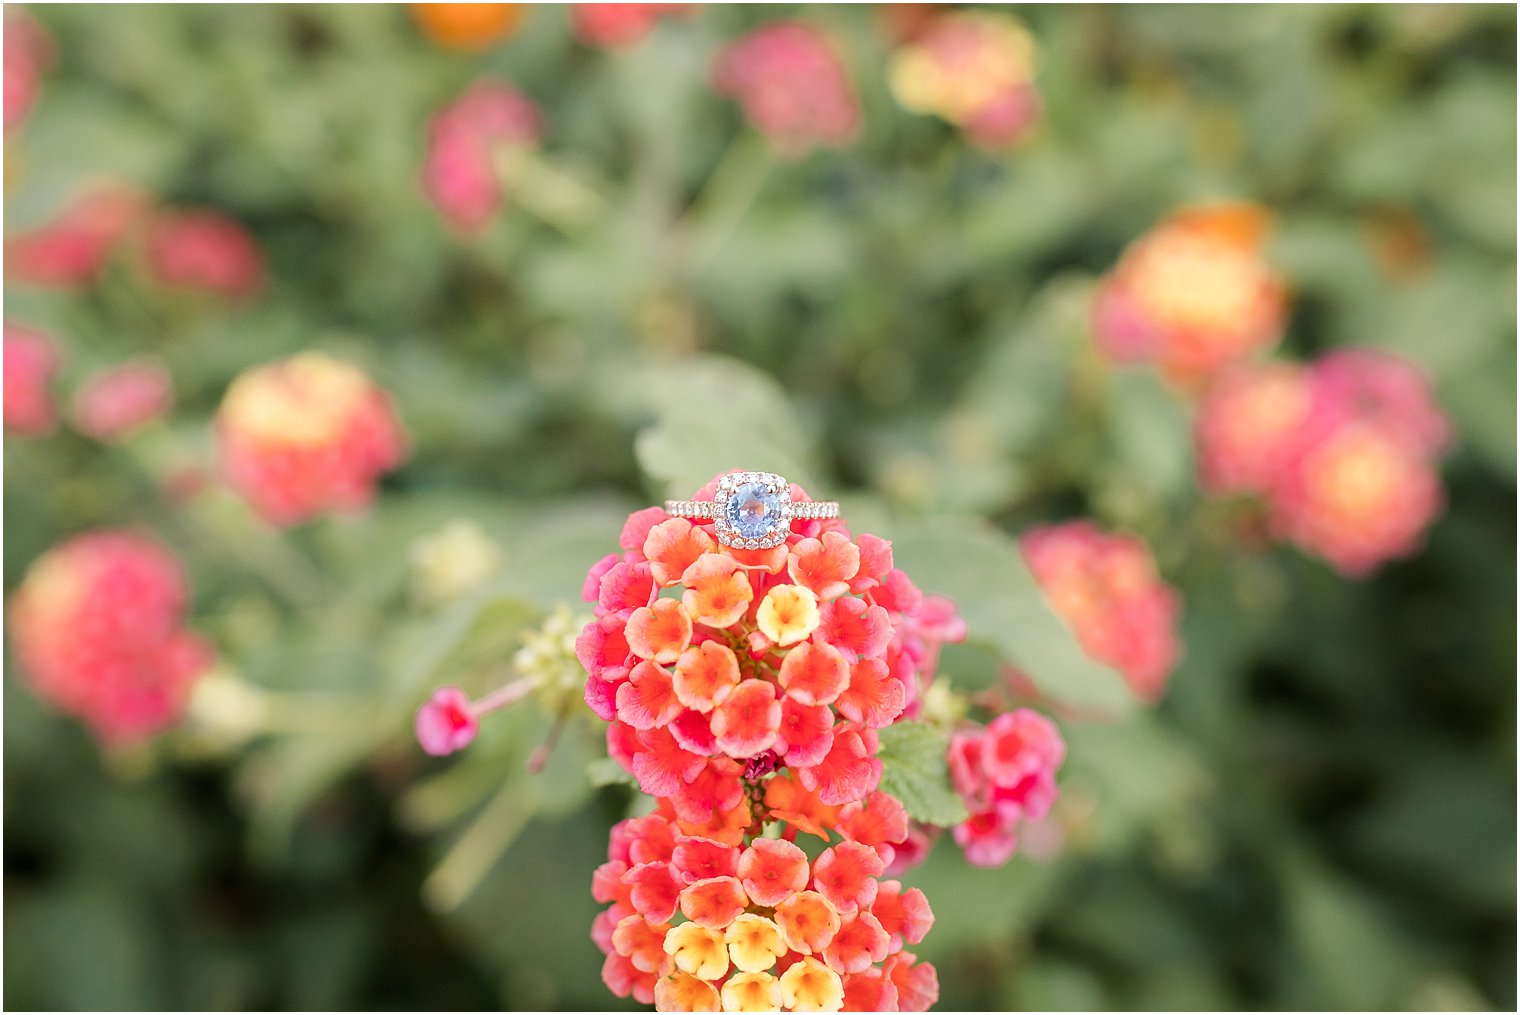 Engagement ring with sapphire on colorful flowers